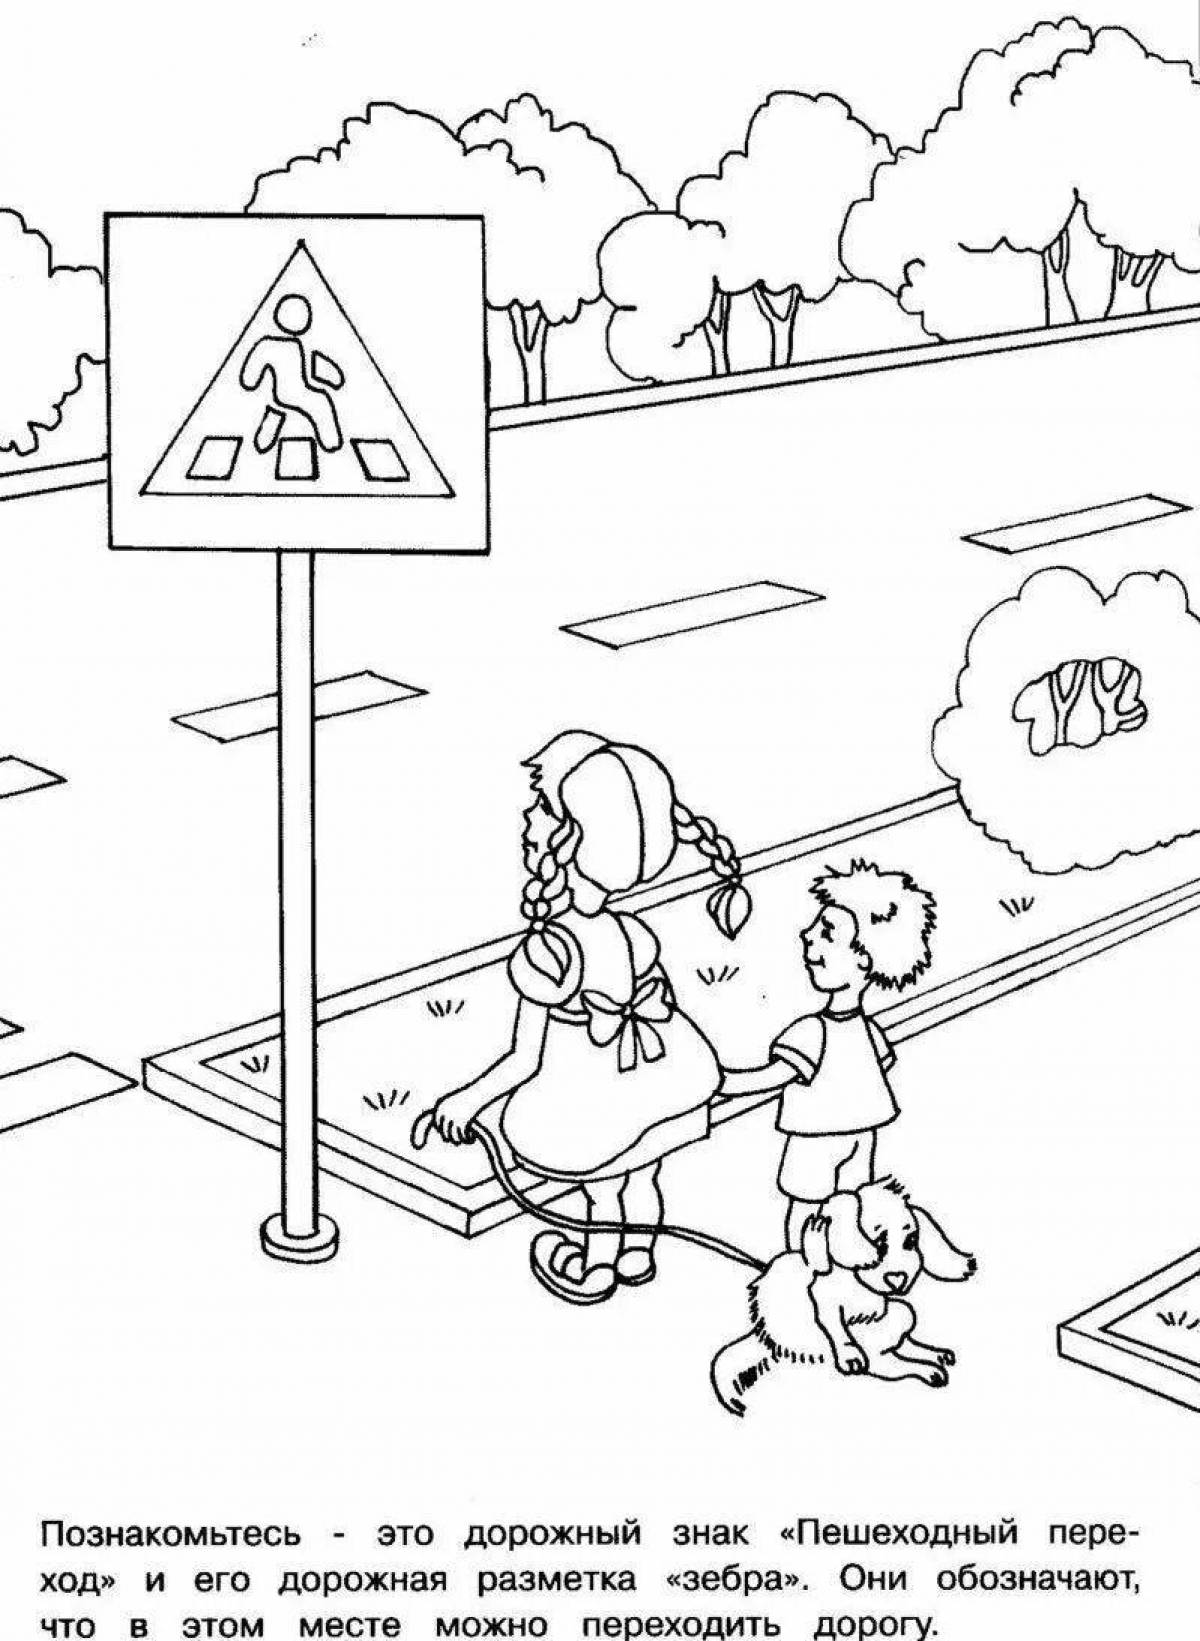 Coloring page exciting railway safety signs